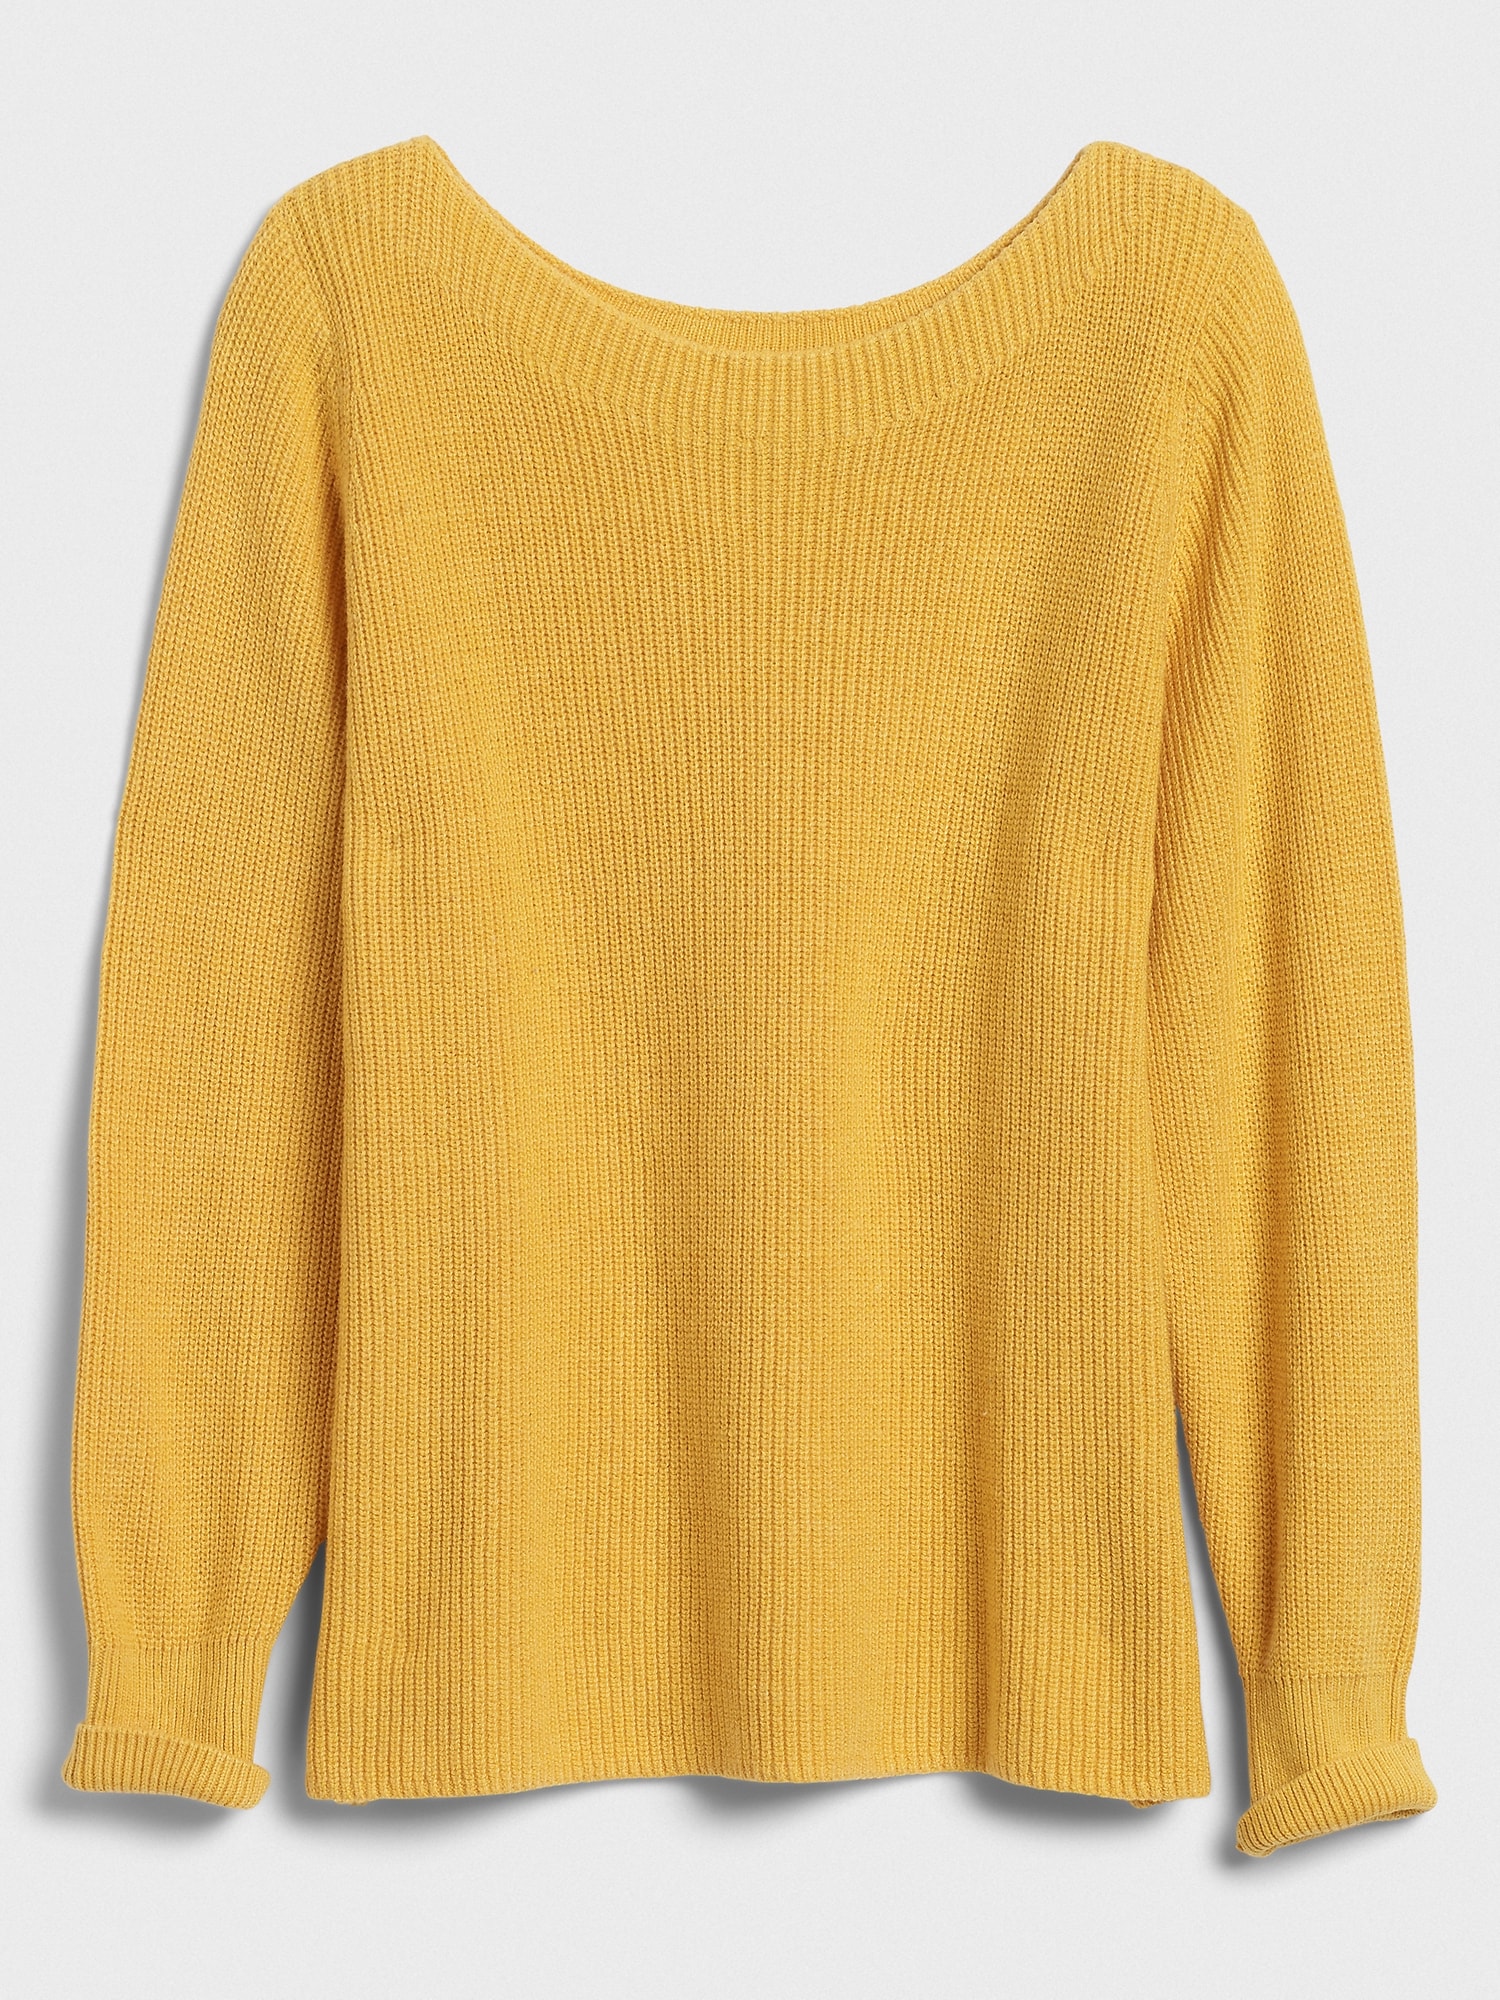 Ribbed Boat-Neck Sweater